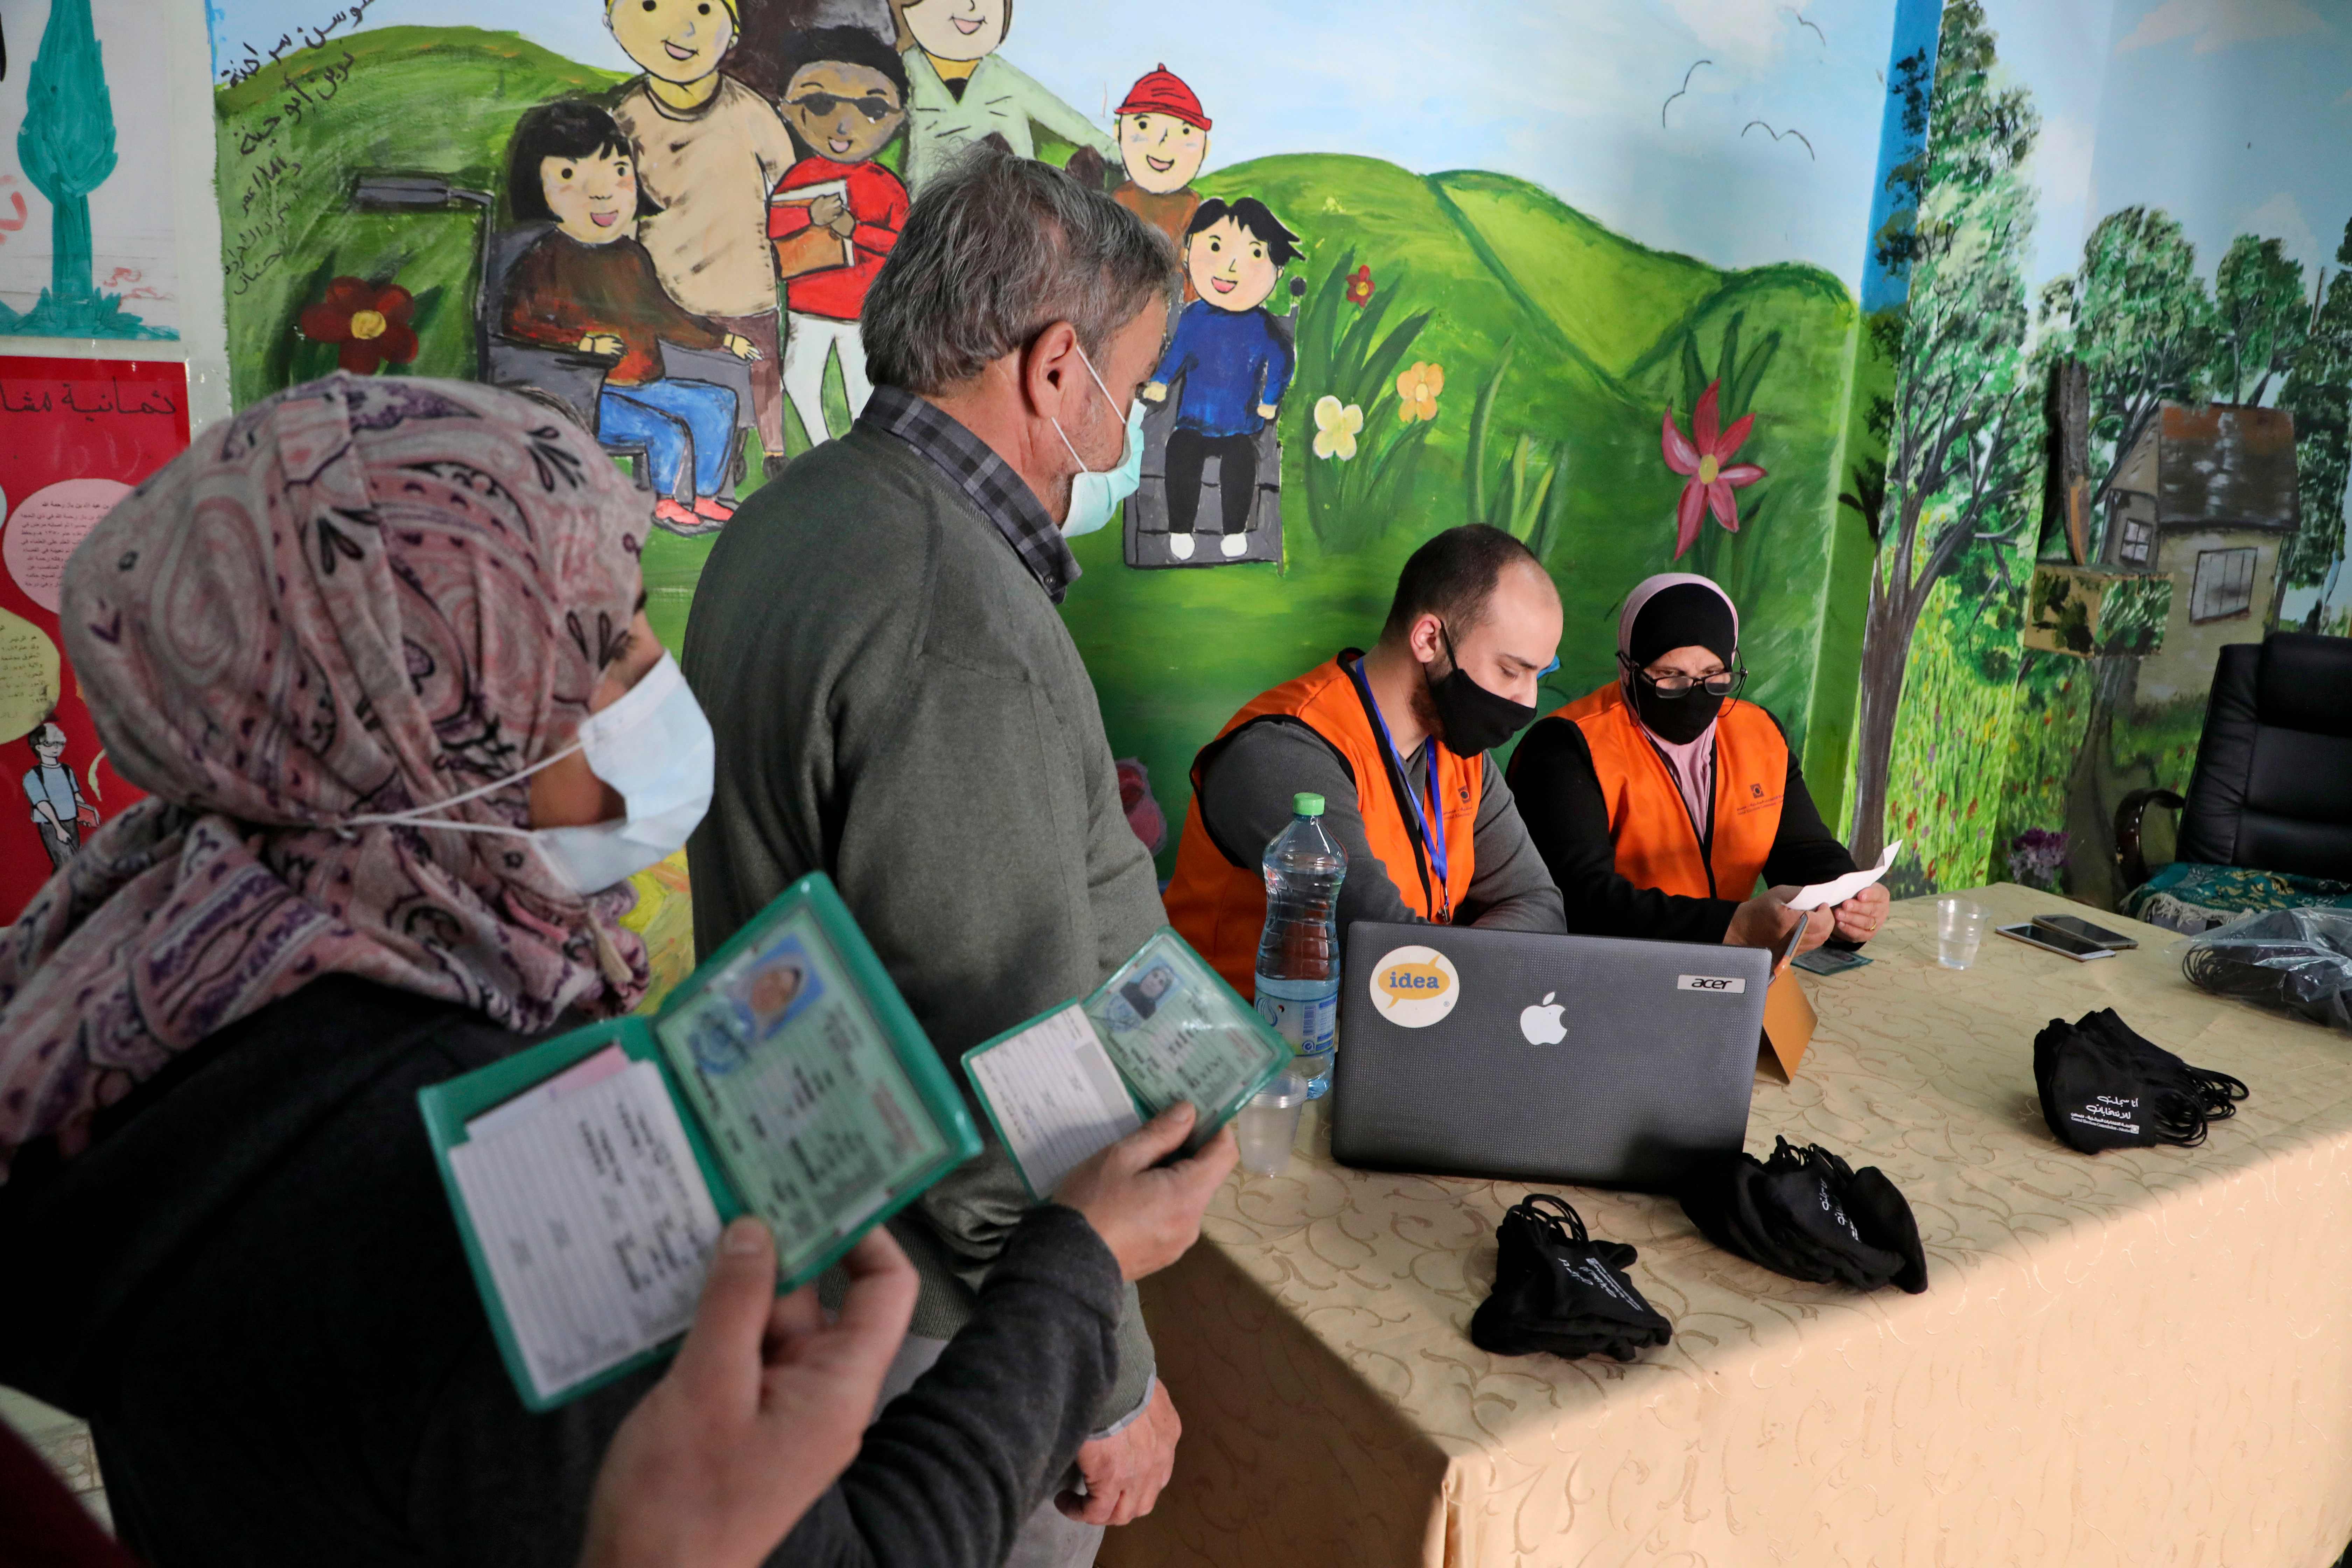 Members of the Palestinian Central Elections Commission register voters in the West Bank town of Hebron